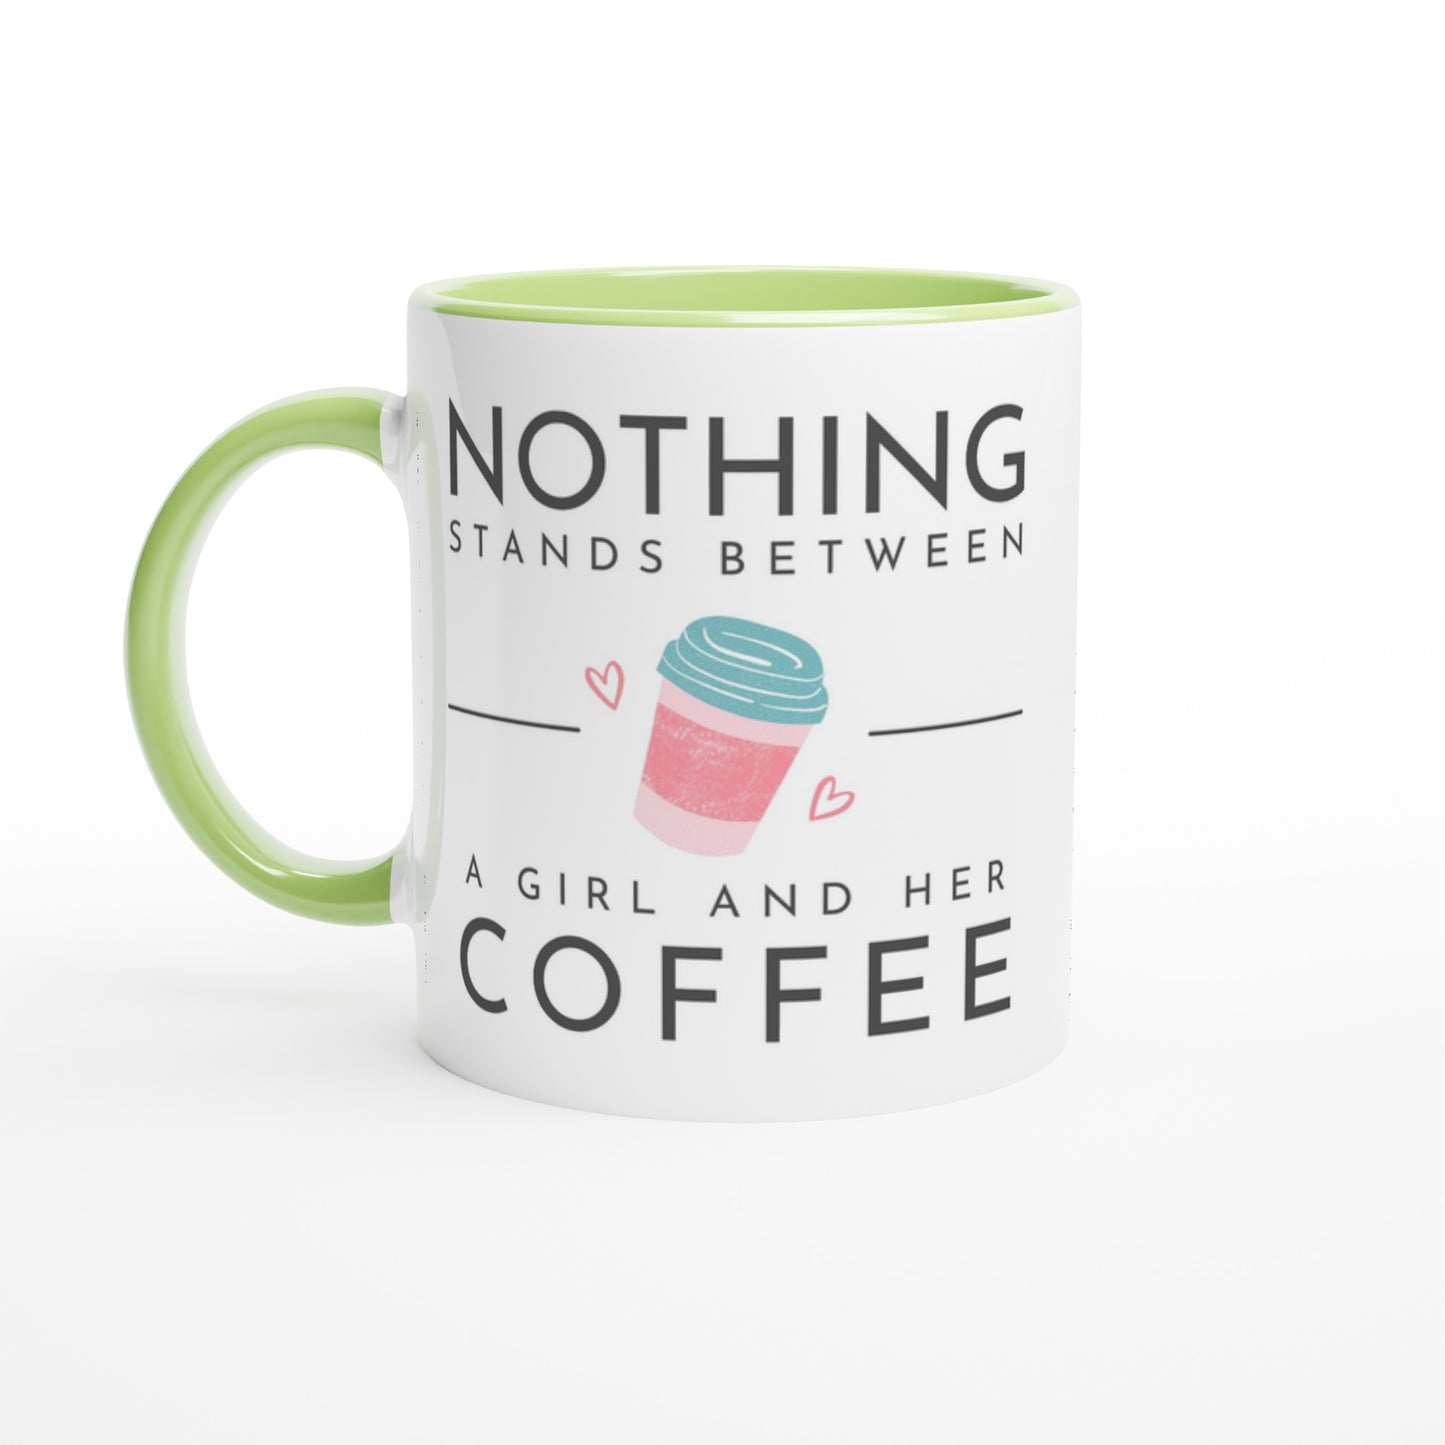 Nothing Stands Between A Girl And Her Coffee - White 11oz Ceramic Mug with Colour Inside Ceramic Green Colour 11oz Mug Coffee